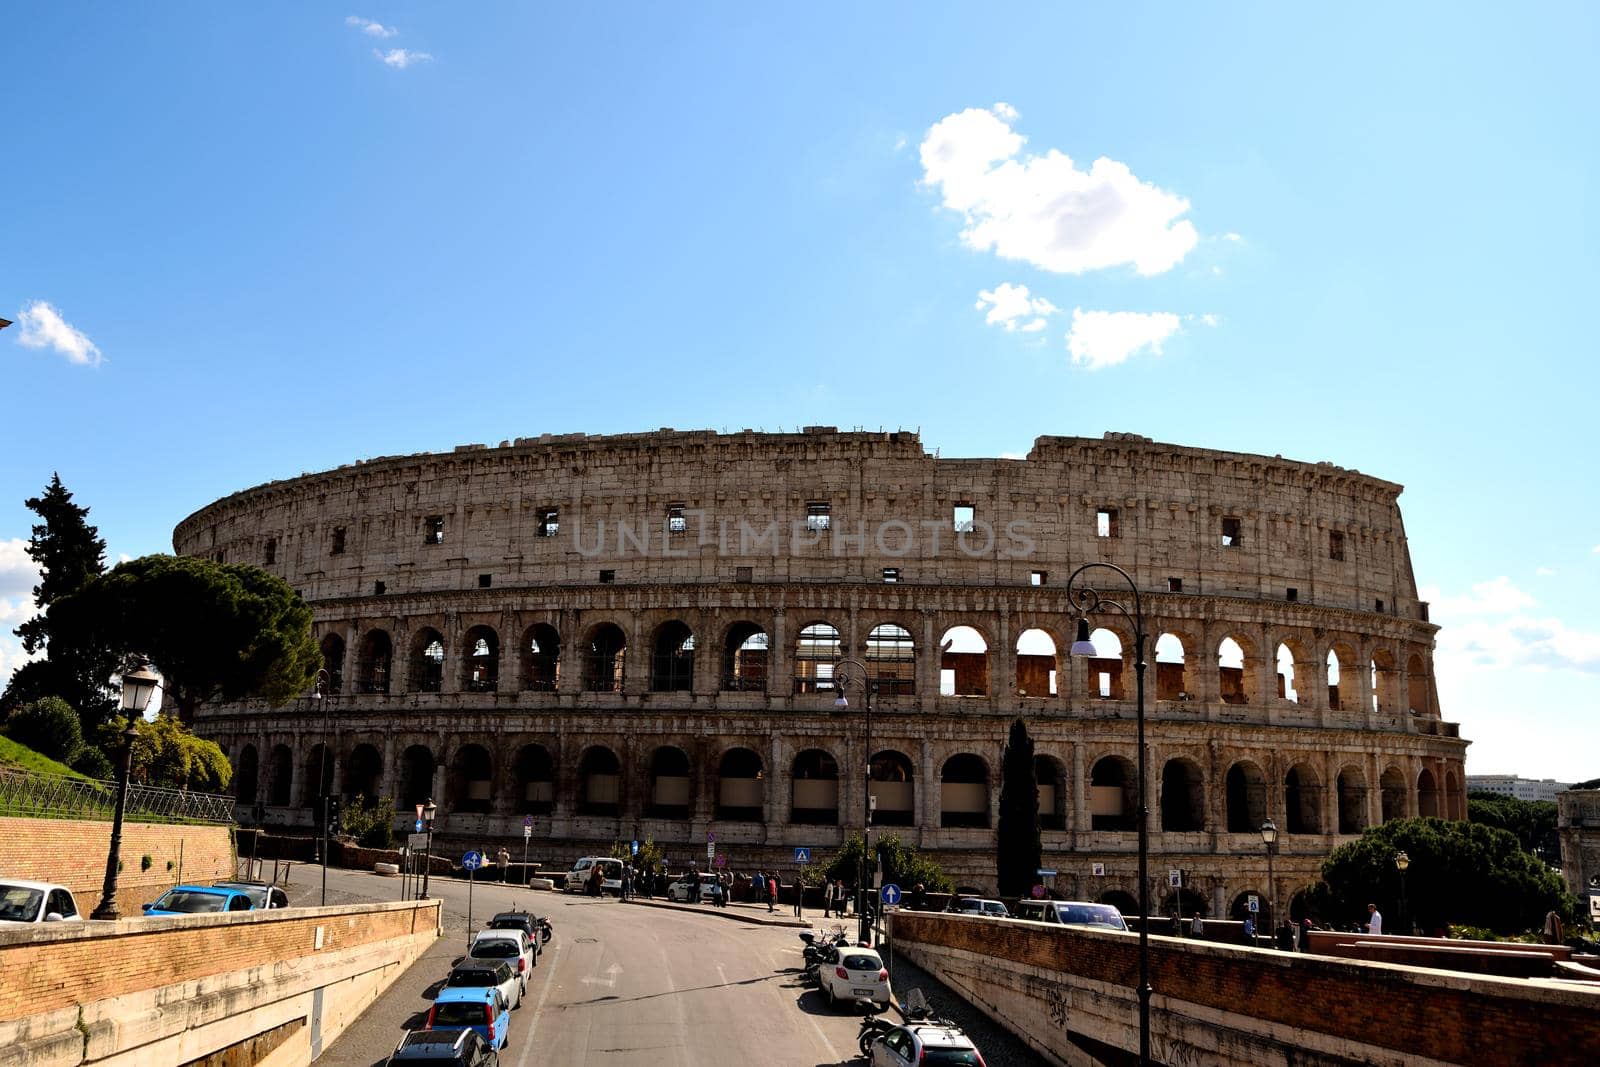 March 8th 2020, Rome, Italy: View of the Colosseum with few tourists due to the coronavirus by silentstock639